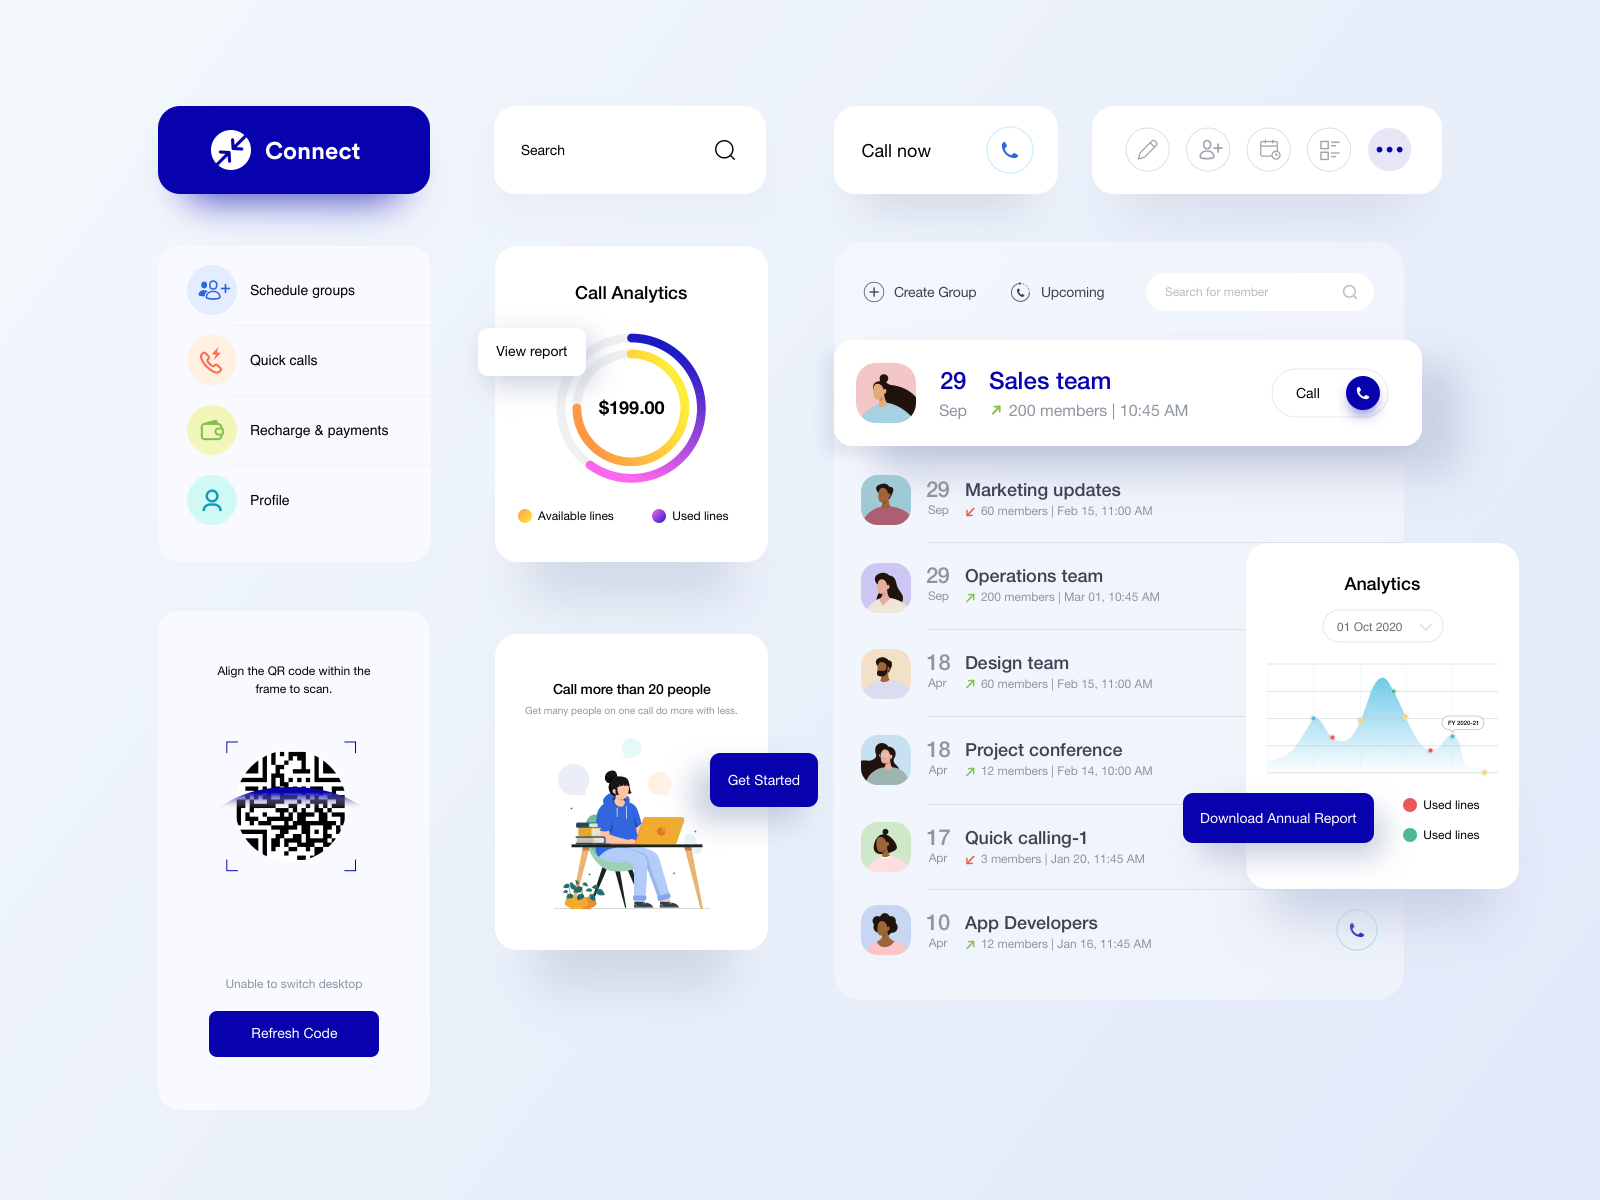 Connect - Case study by Sathish on Dribbble